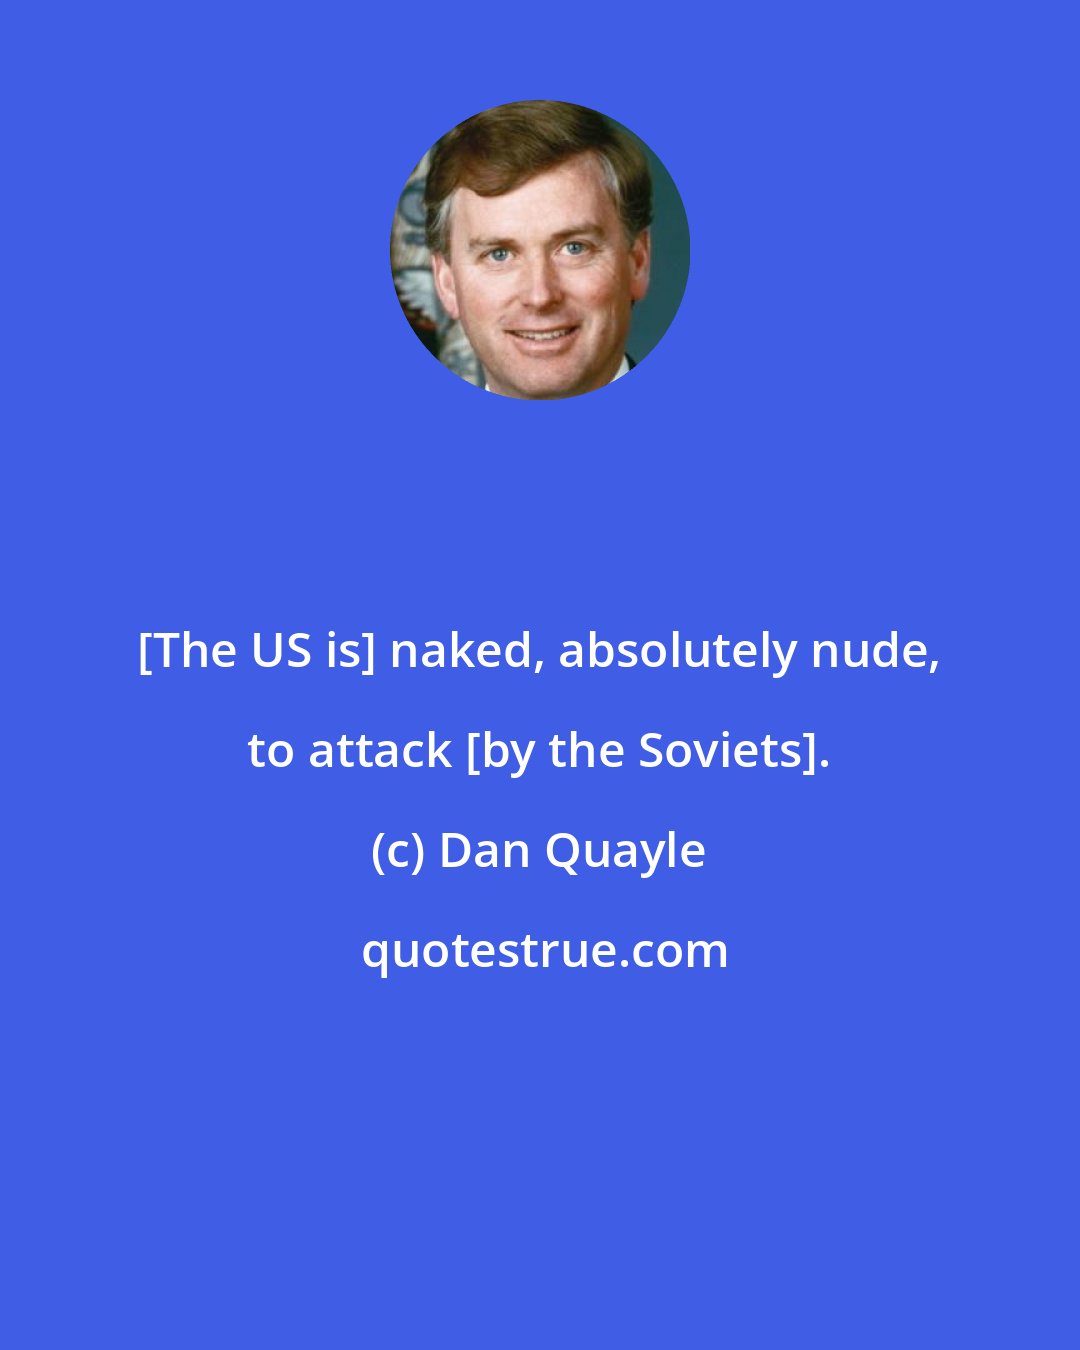 Dan Quayle: [The US is] naked, absolutely nude, to attack [by the Soviets].